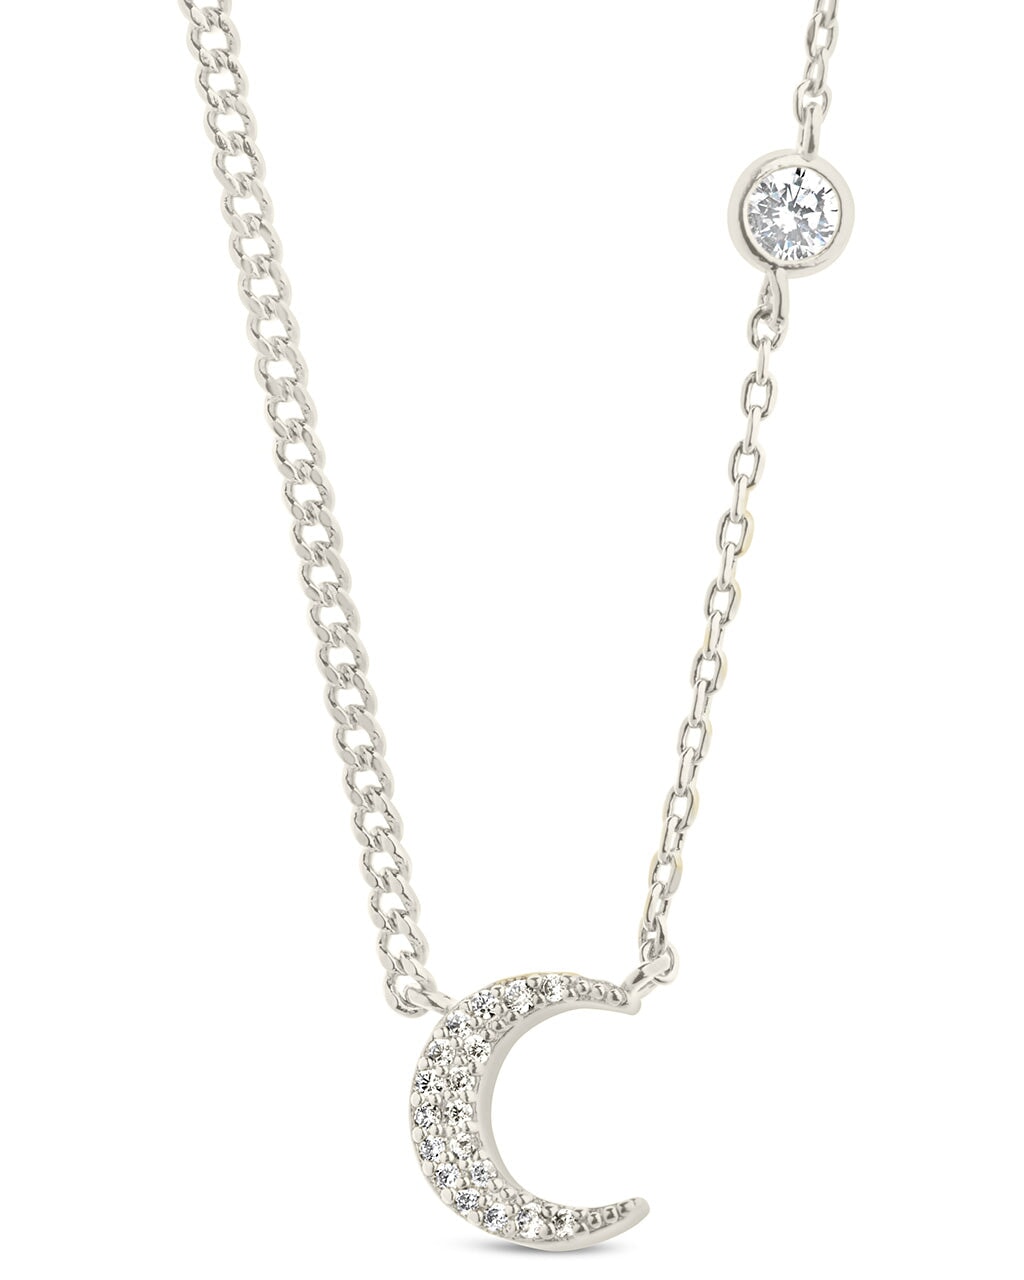 Crystal Crescent Moon Necklace Necklace Sterling Forever Silver 